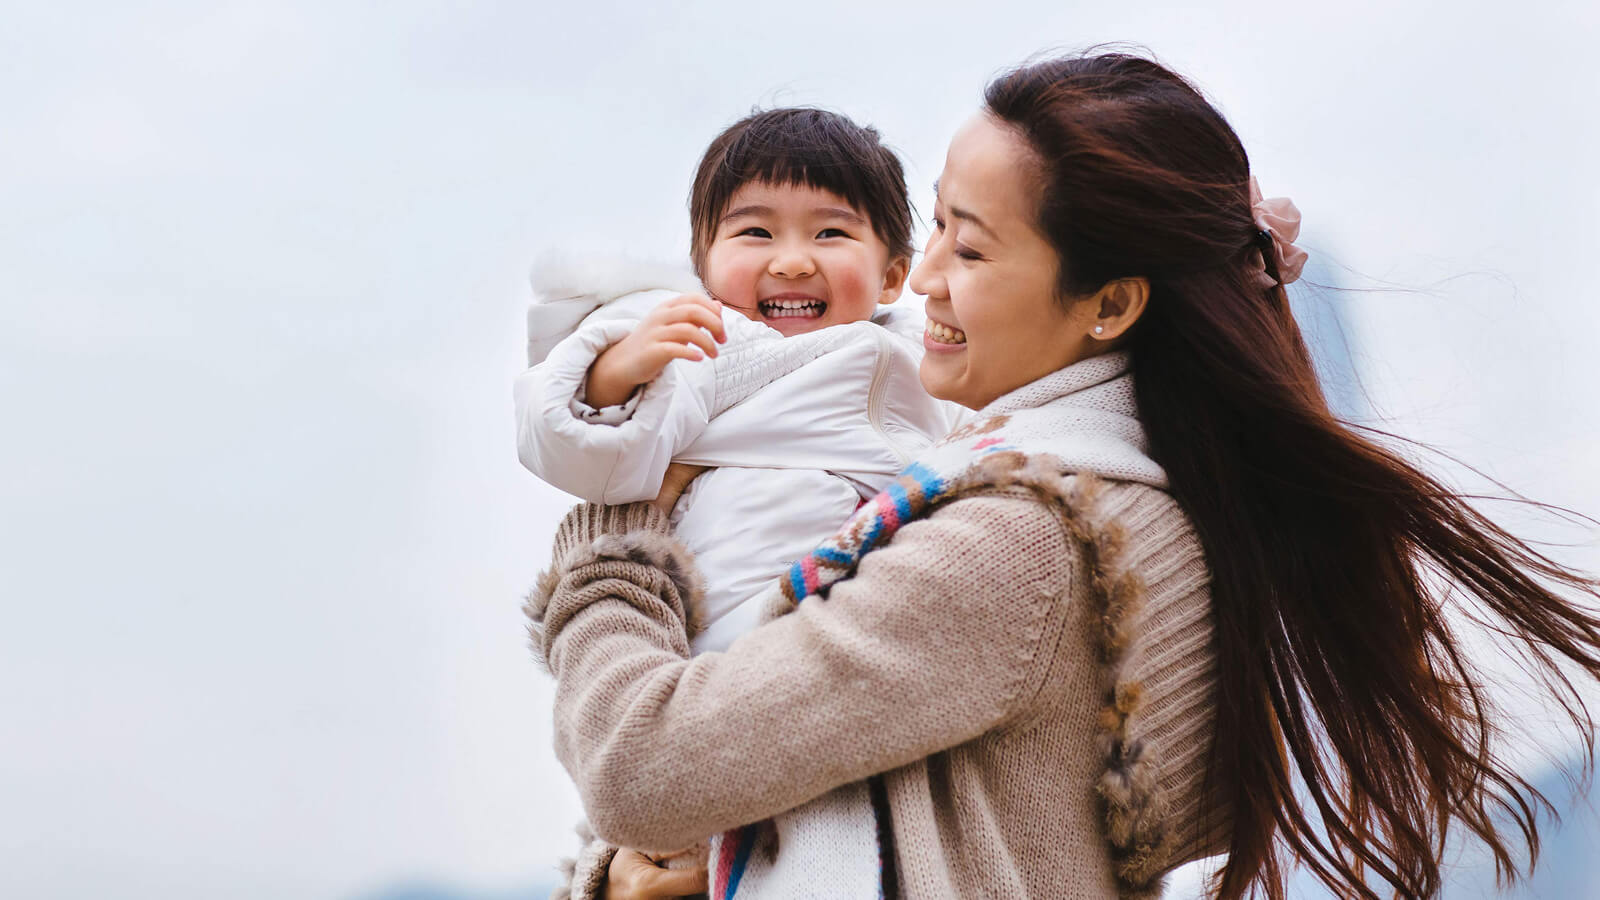 A smiling mother of Asian descent holds her smiling baby.